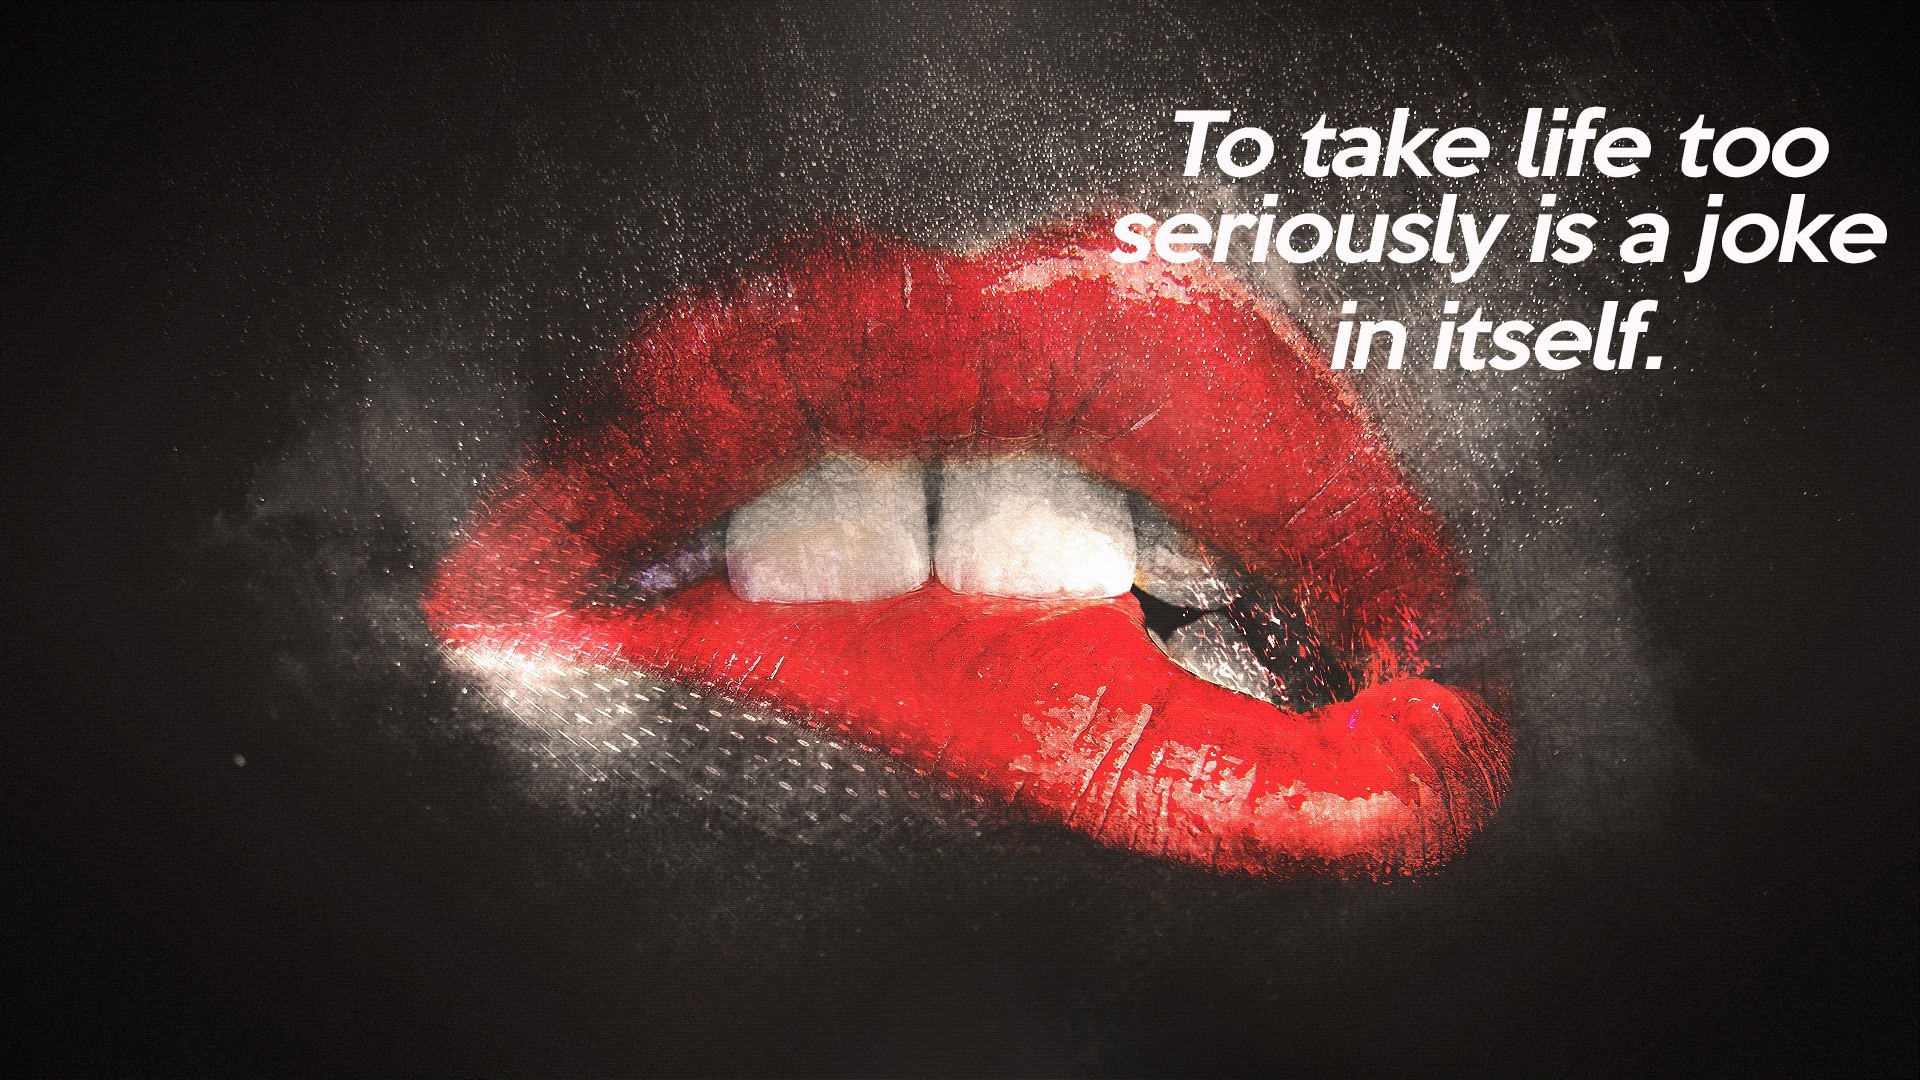 Minimalism Lips Mouths Biting Lip Quote Life Red Lipstick Wisdom Typography Artwork Red 1920x1080